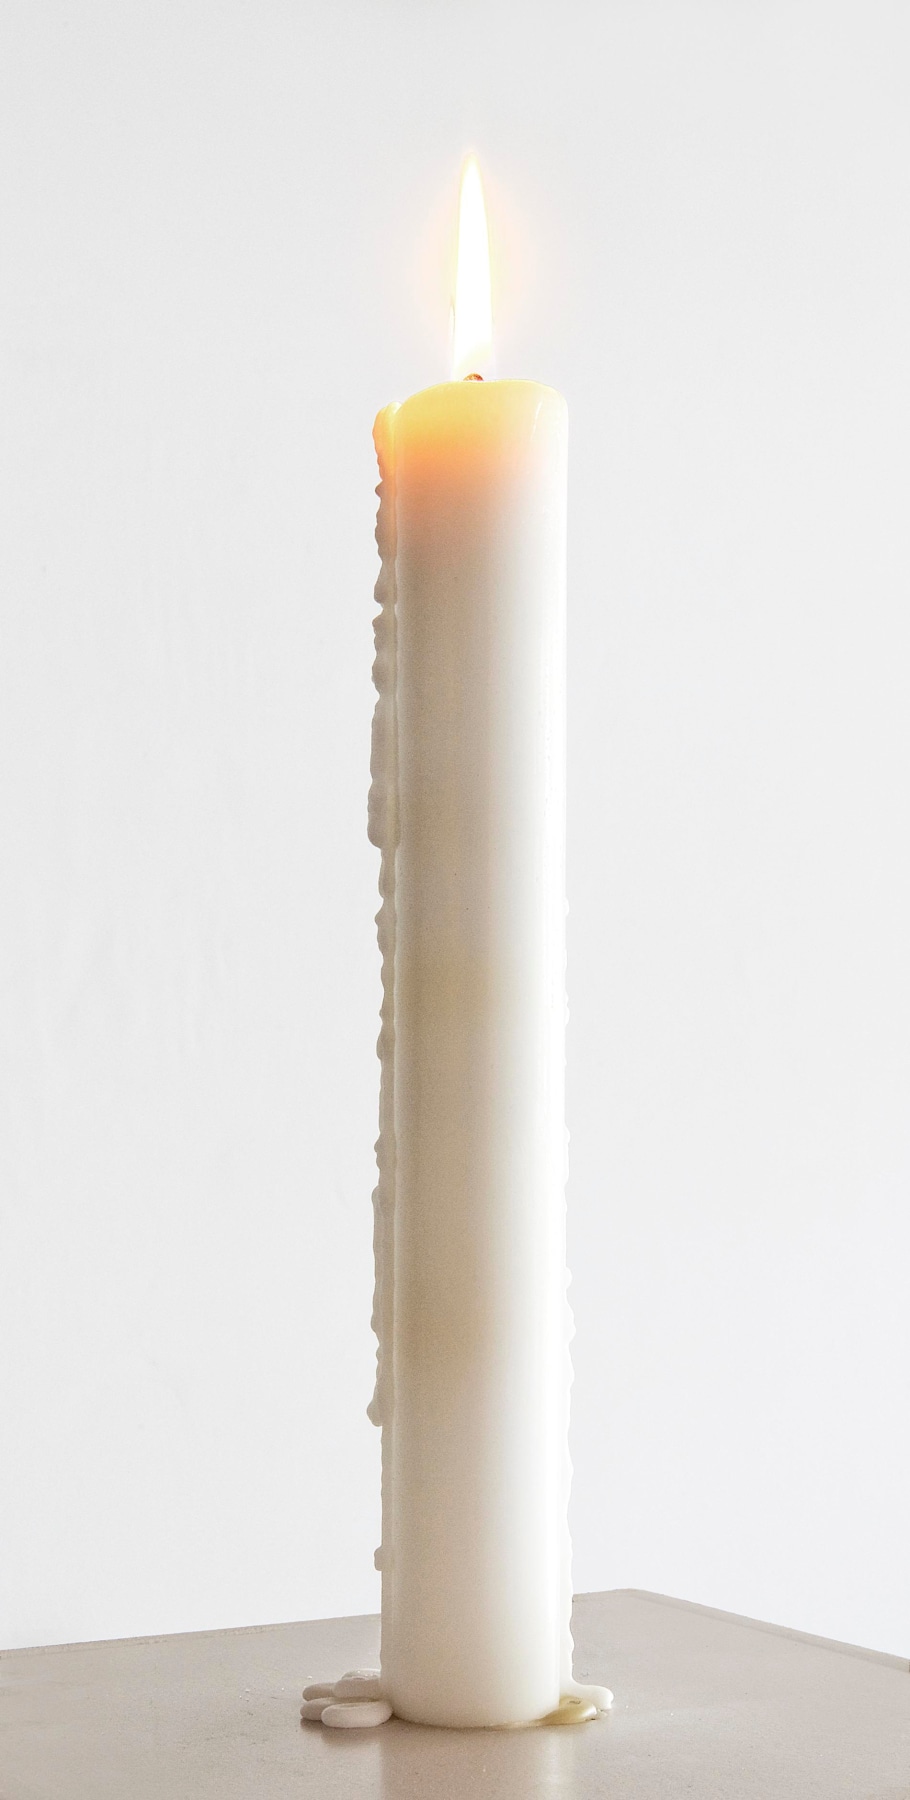 Image of KATIE PATERSON's Candle (From Earth into a Black Hole), 2015